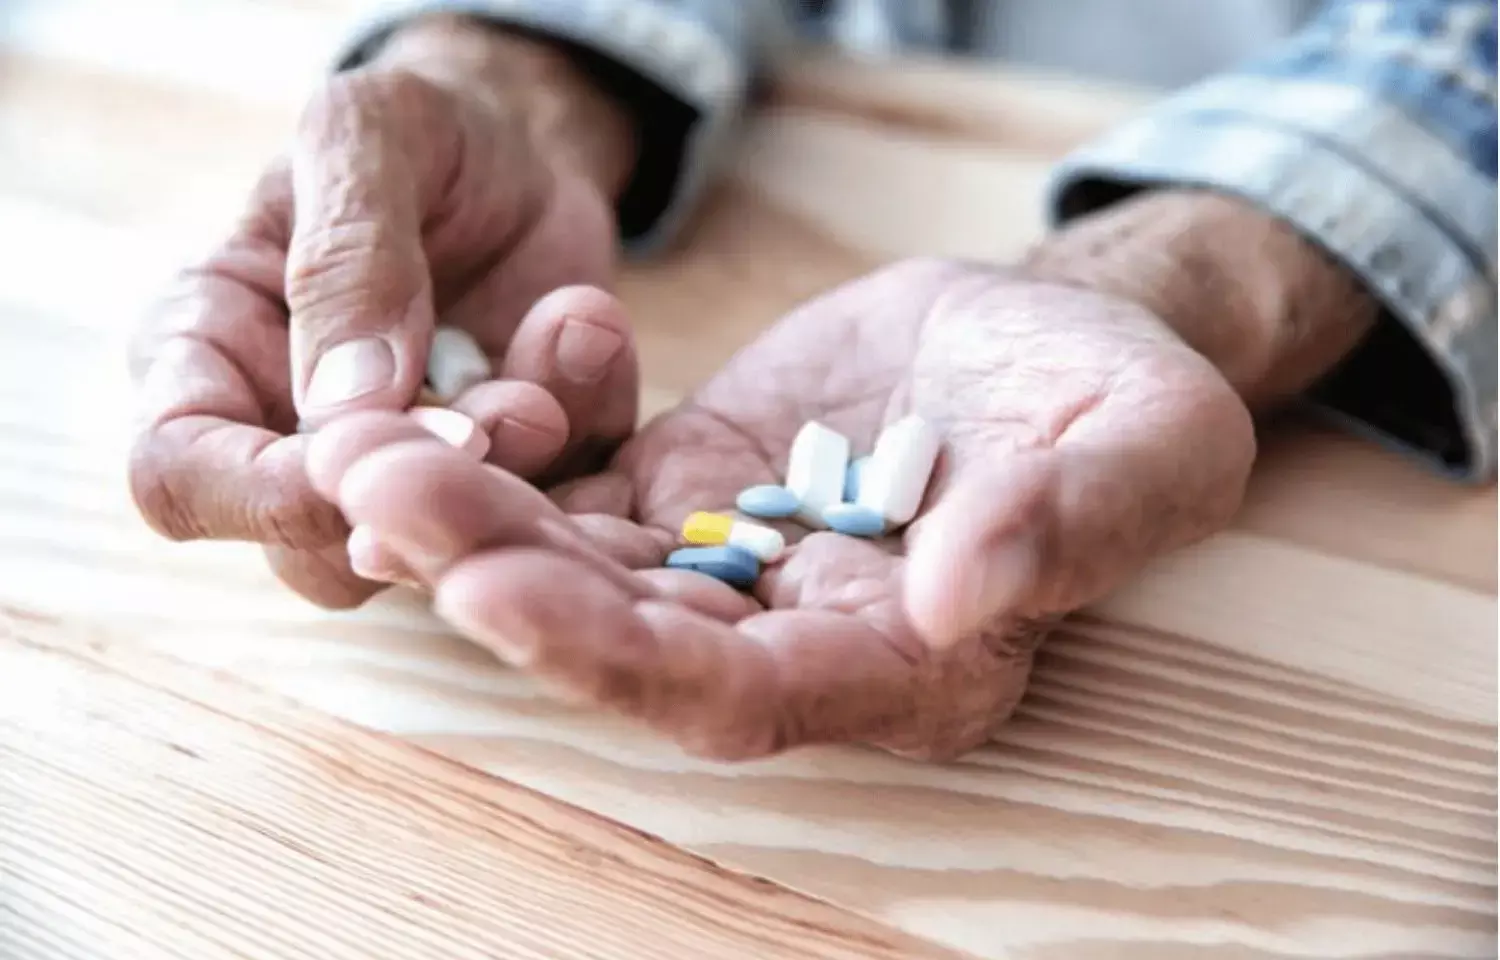 Drug interactions with Paxlovid common in older adults with polypharmacy: JAMA